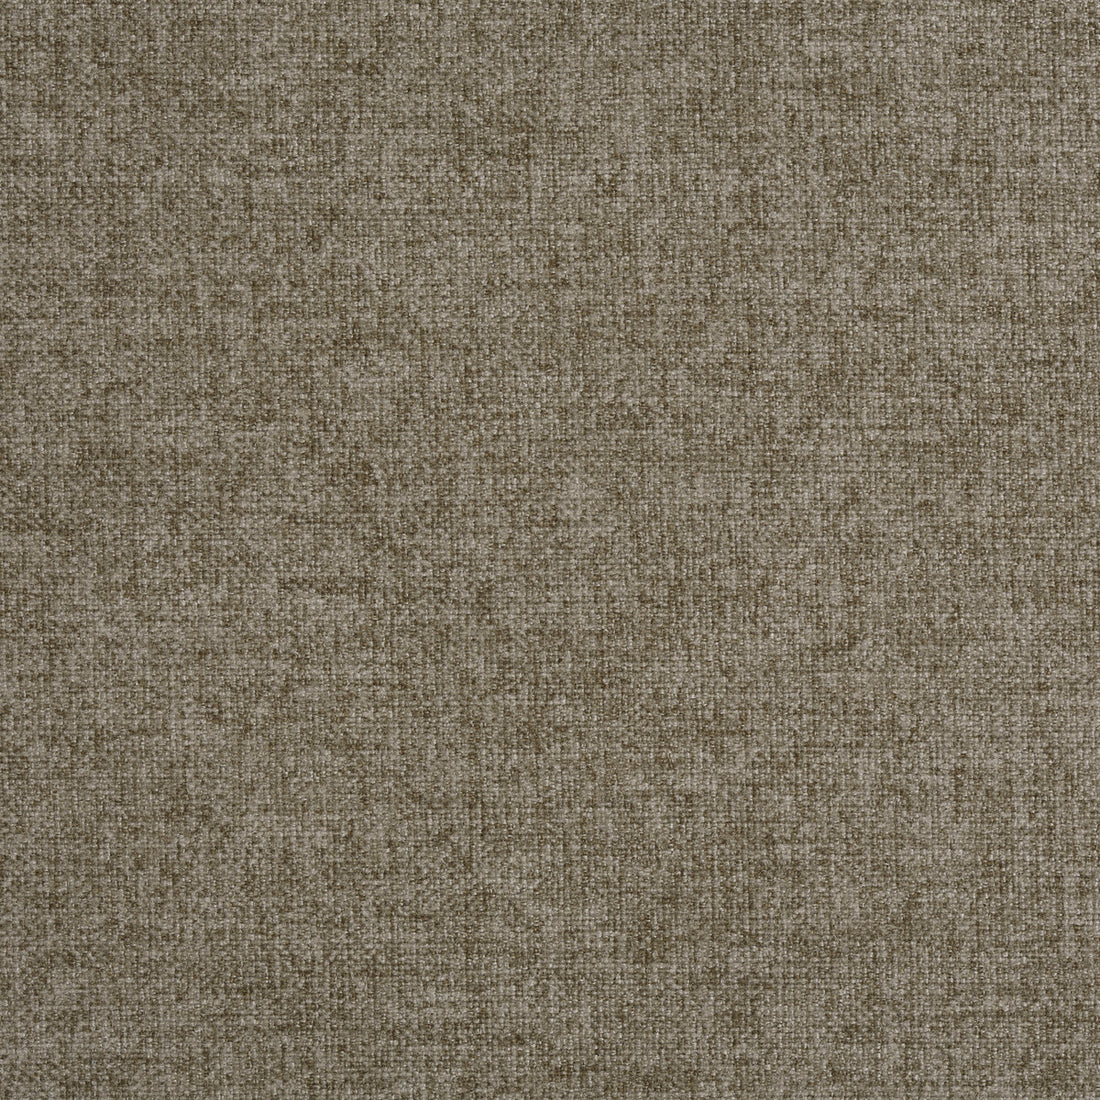 Kravet Smart fabric in 35121-106 color - pattern 35121.106.0 - by Kravet Smart in the Performance Crypton Home collection